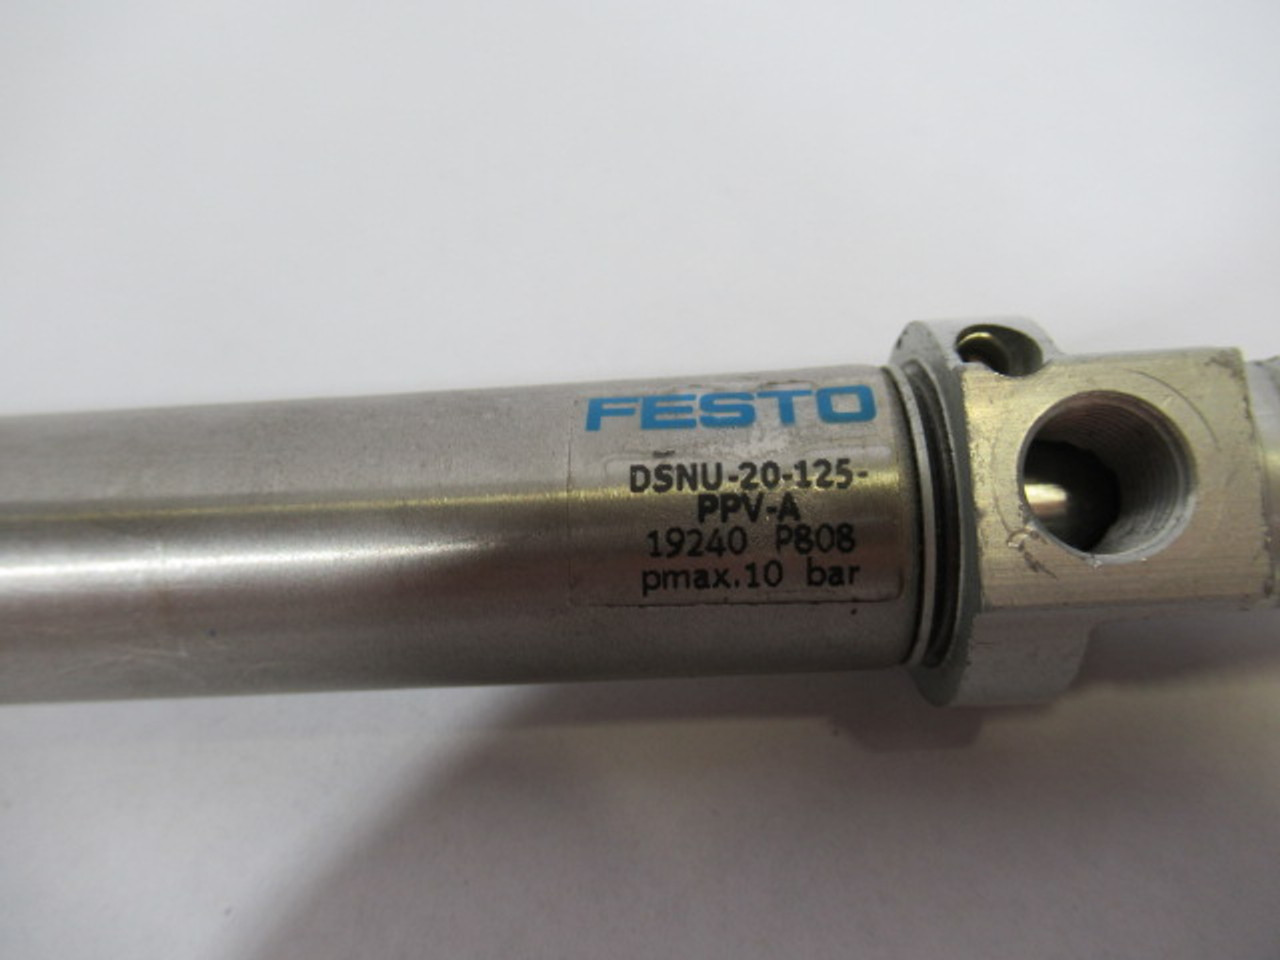 Festo DSNU-20-125-PPV-A 19240 Cylinder 20mm Bore 125mm Stroke USED